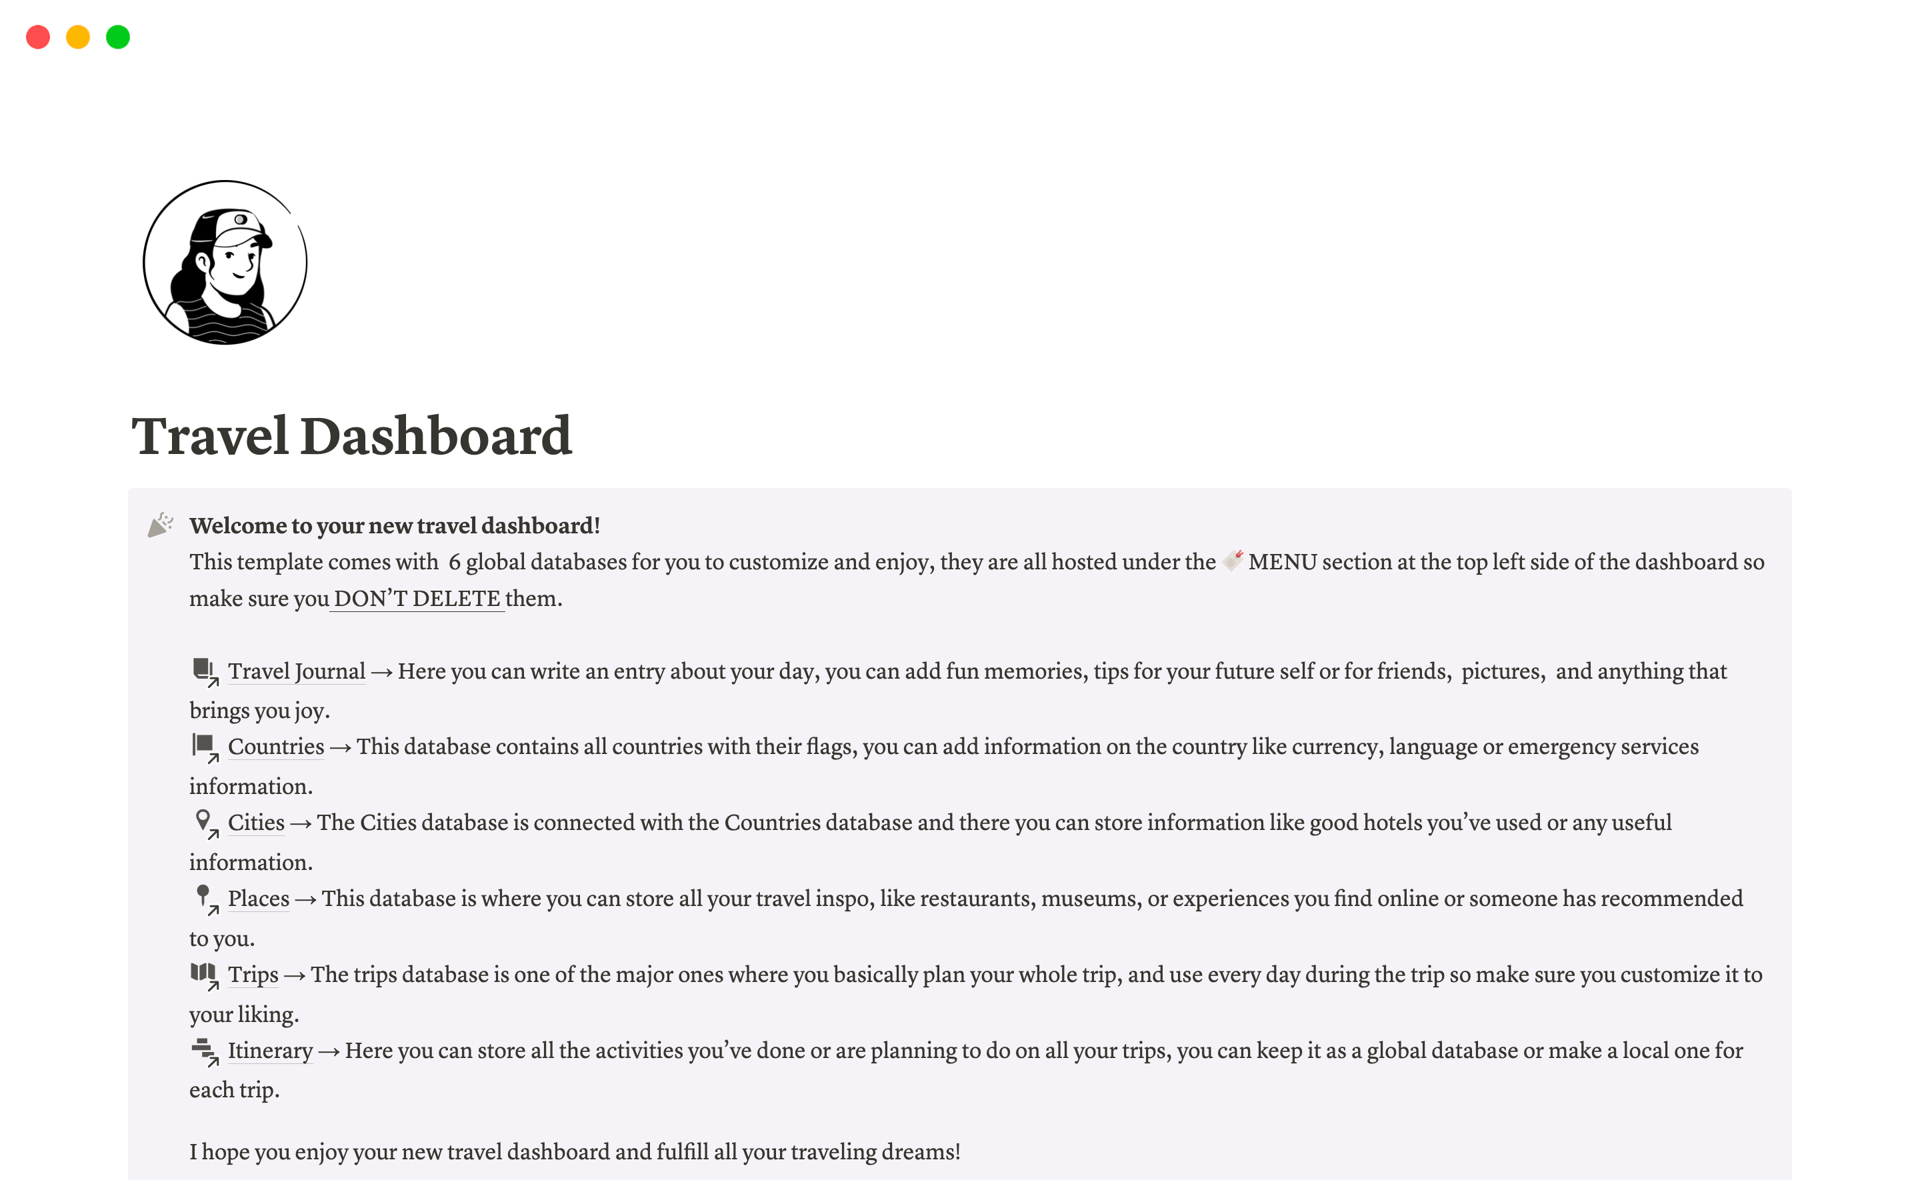 Travel Dashboard with relational databases and Travel Journal